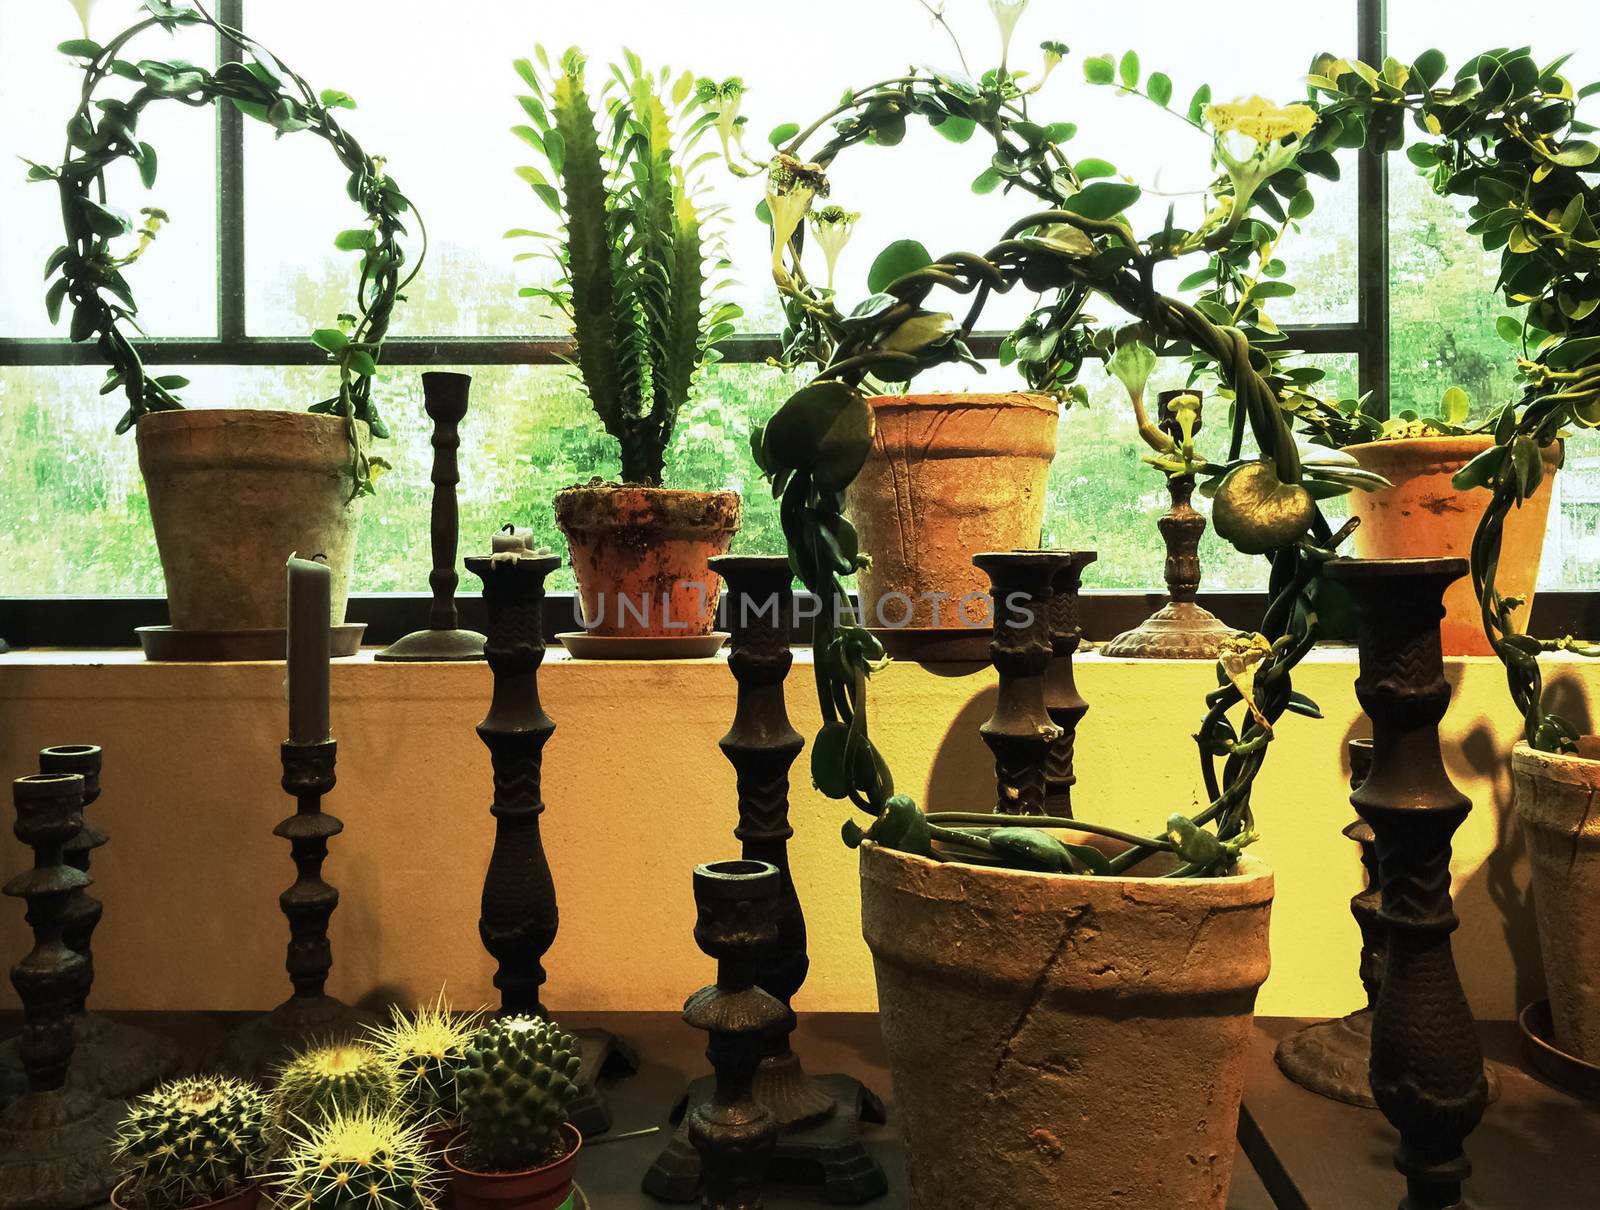 Candles and green plants in clay pots decorating a window.